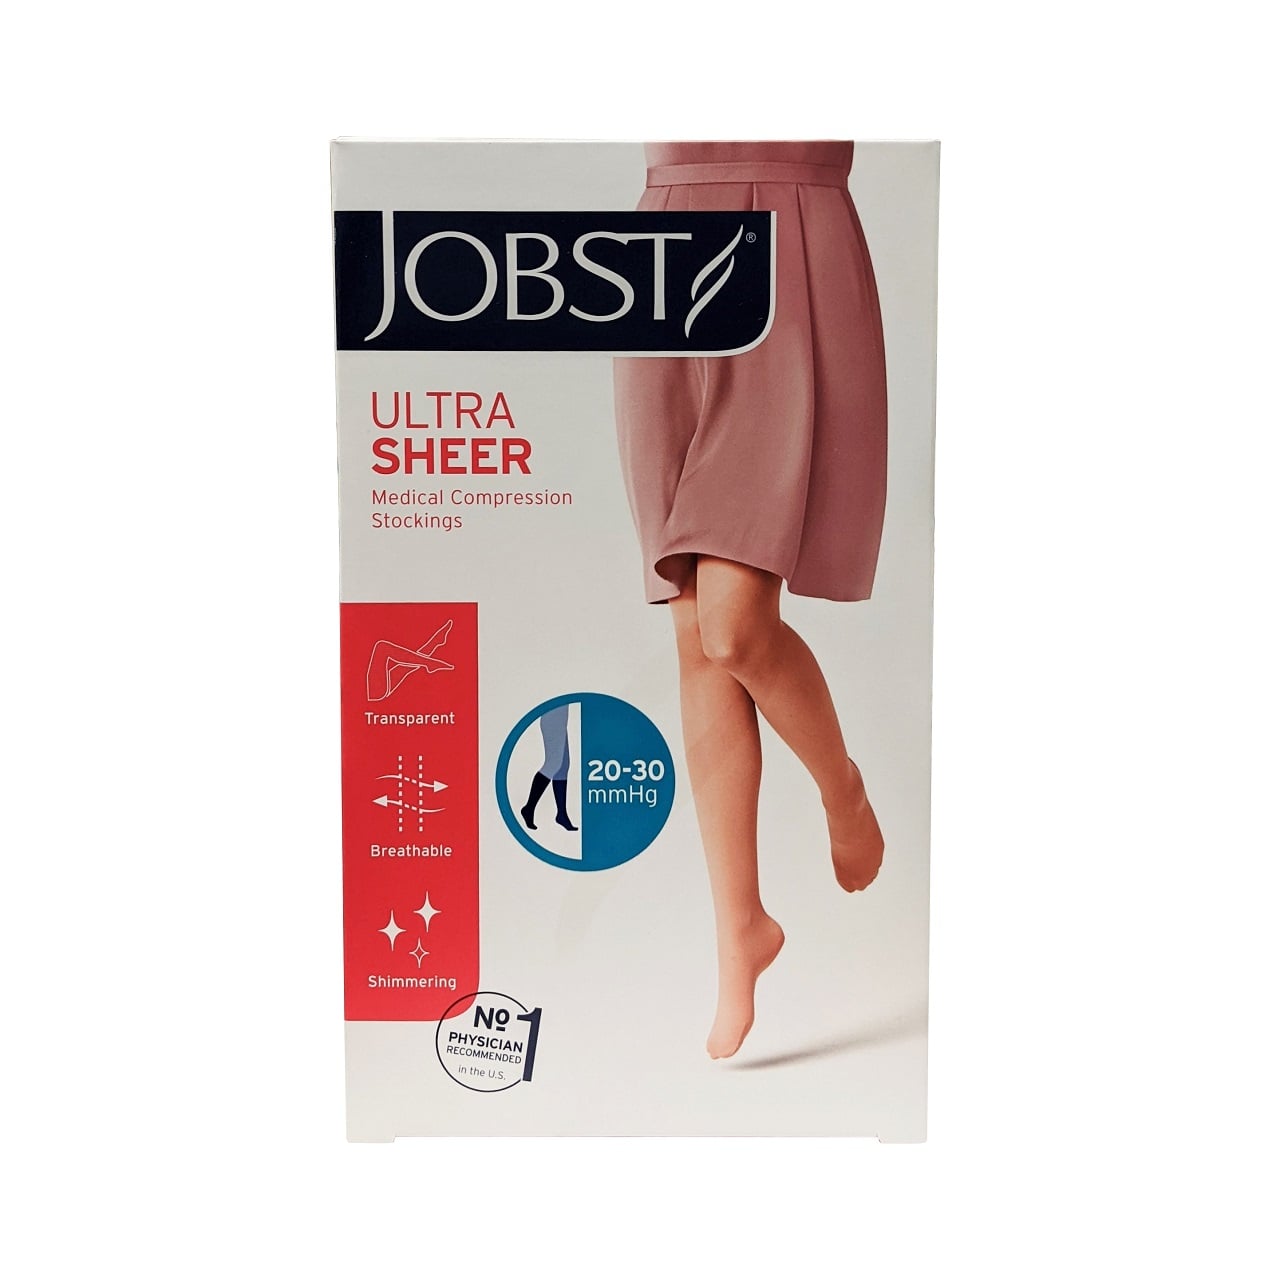 Product label for Jobst UltraSheer Compression Stockings 20-30 mmHg - Knee High / Open Toe / Natural (Small)